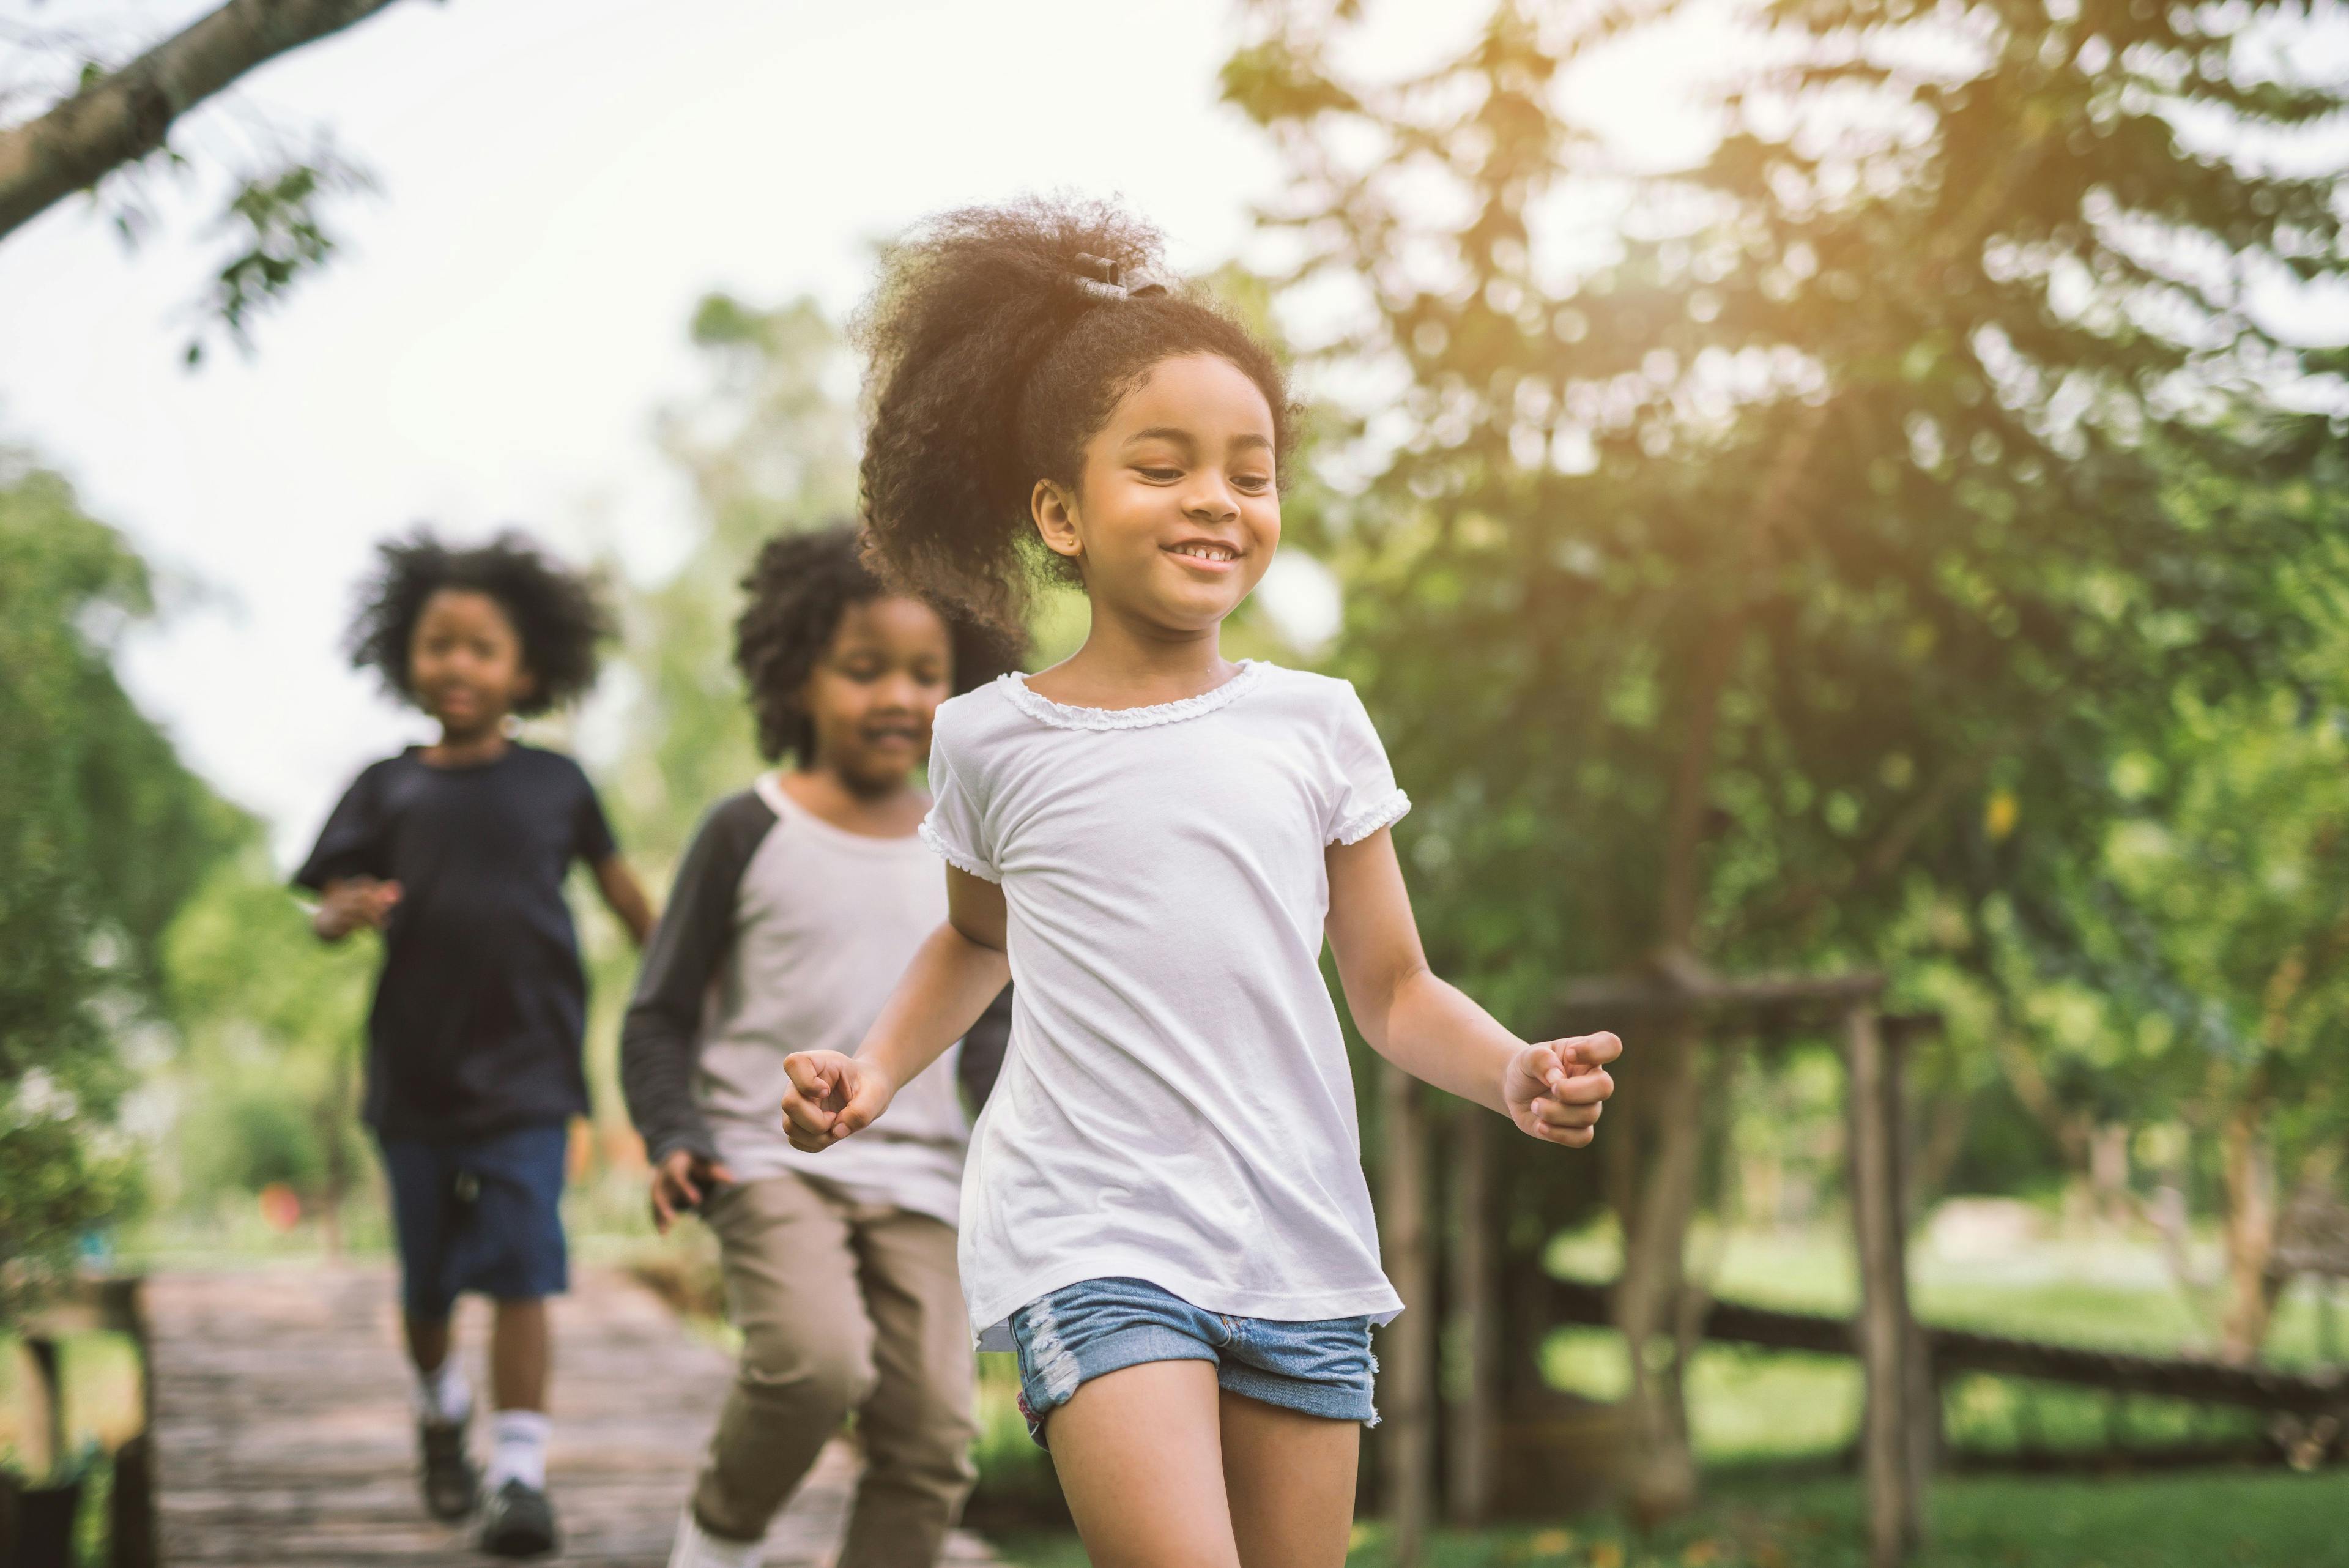 Better Neighborhood Conditions Associated With Lower Asthma Rates in Children 